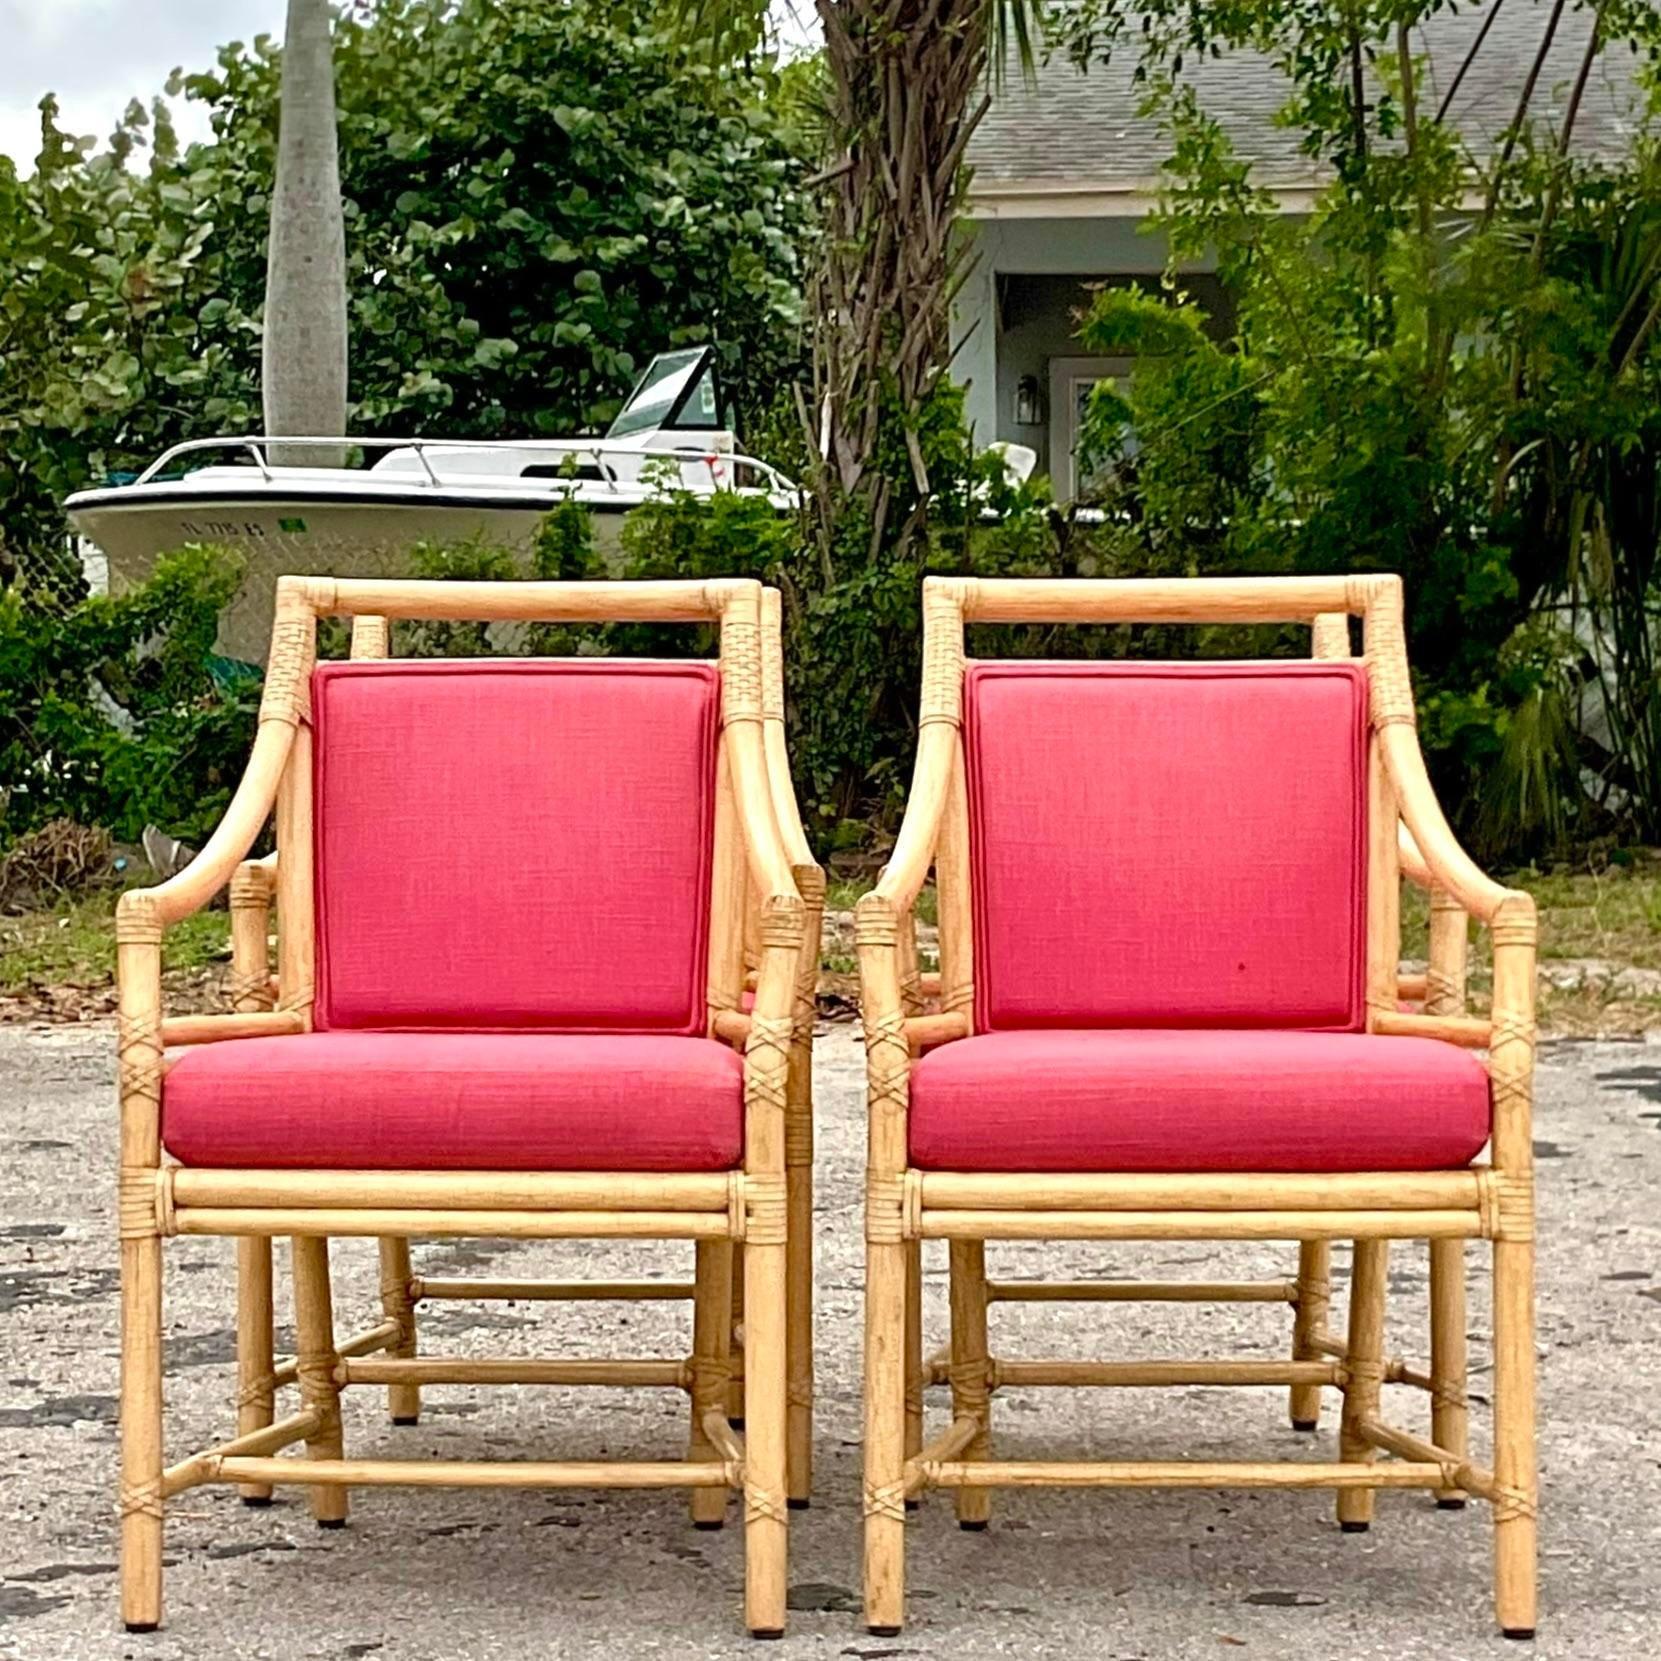 Upholstery Vintage Coastal McGuire Target Back Rattan Dining Chairs - Set of 4 For Sale